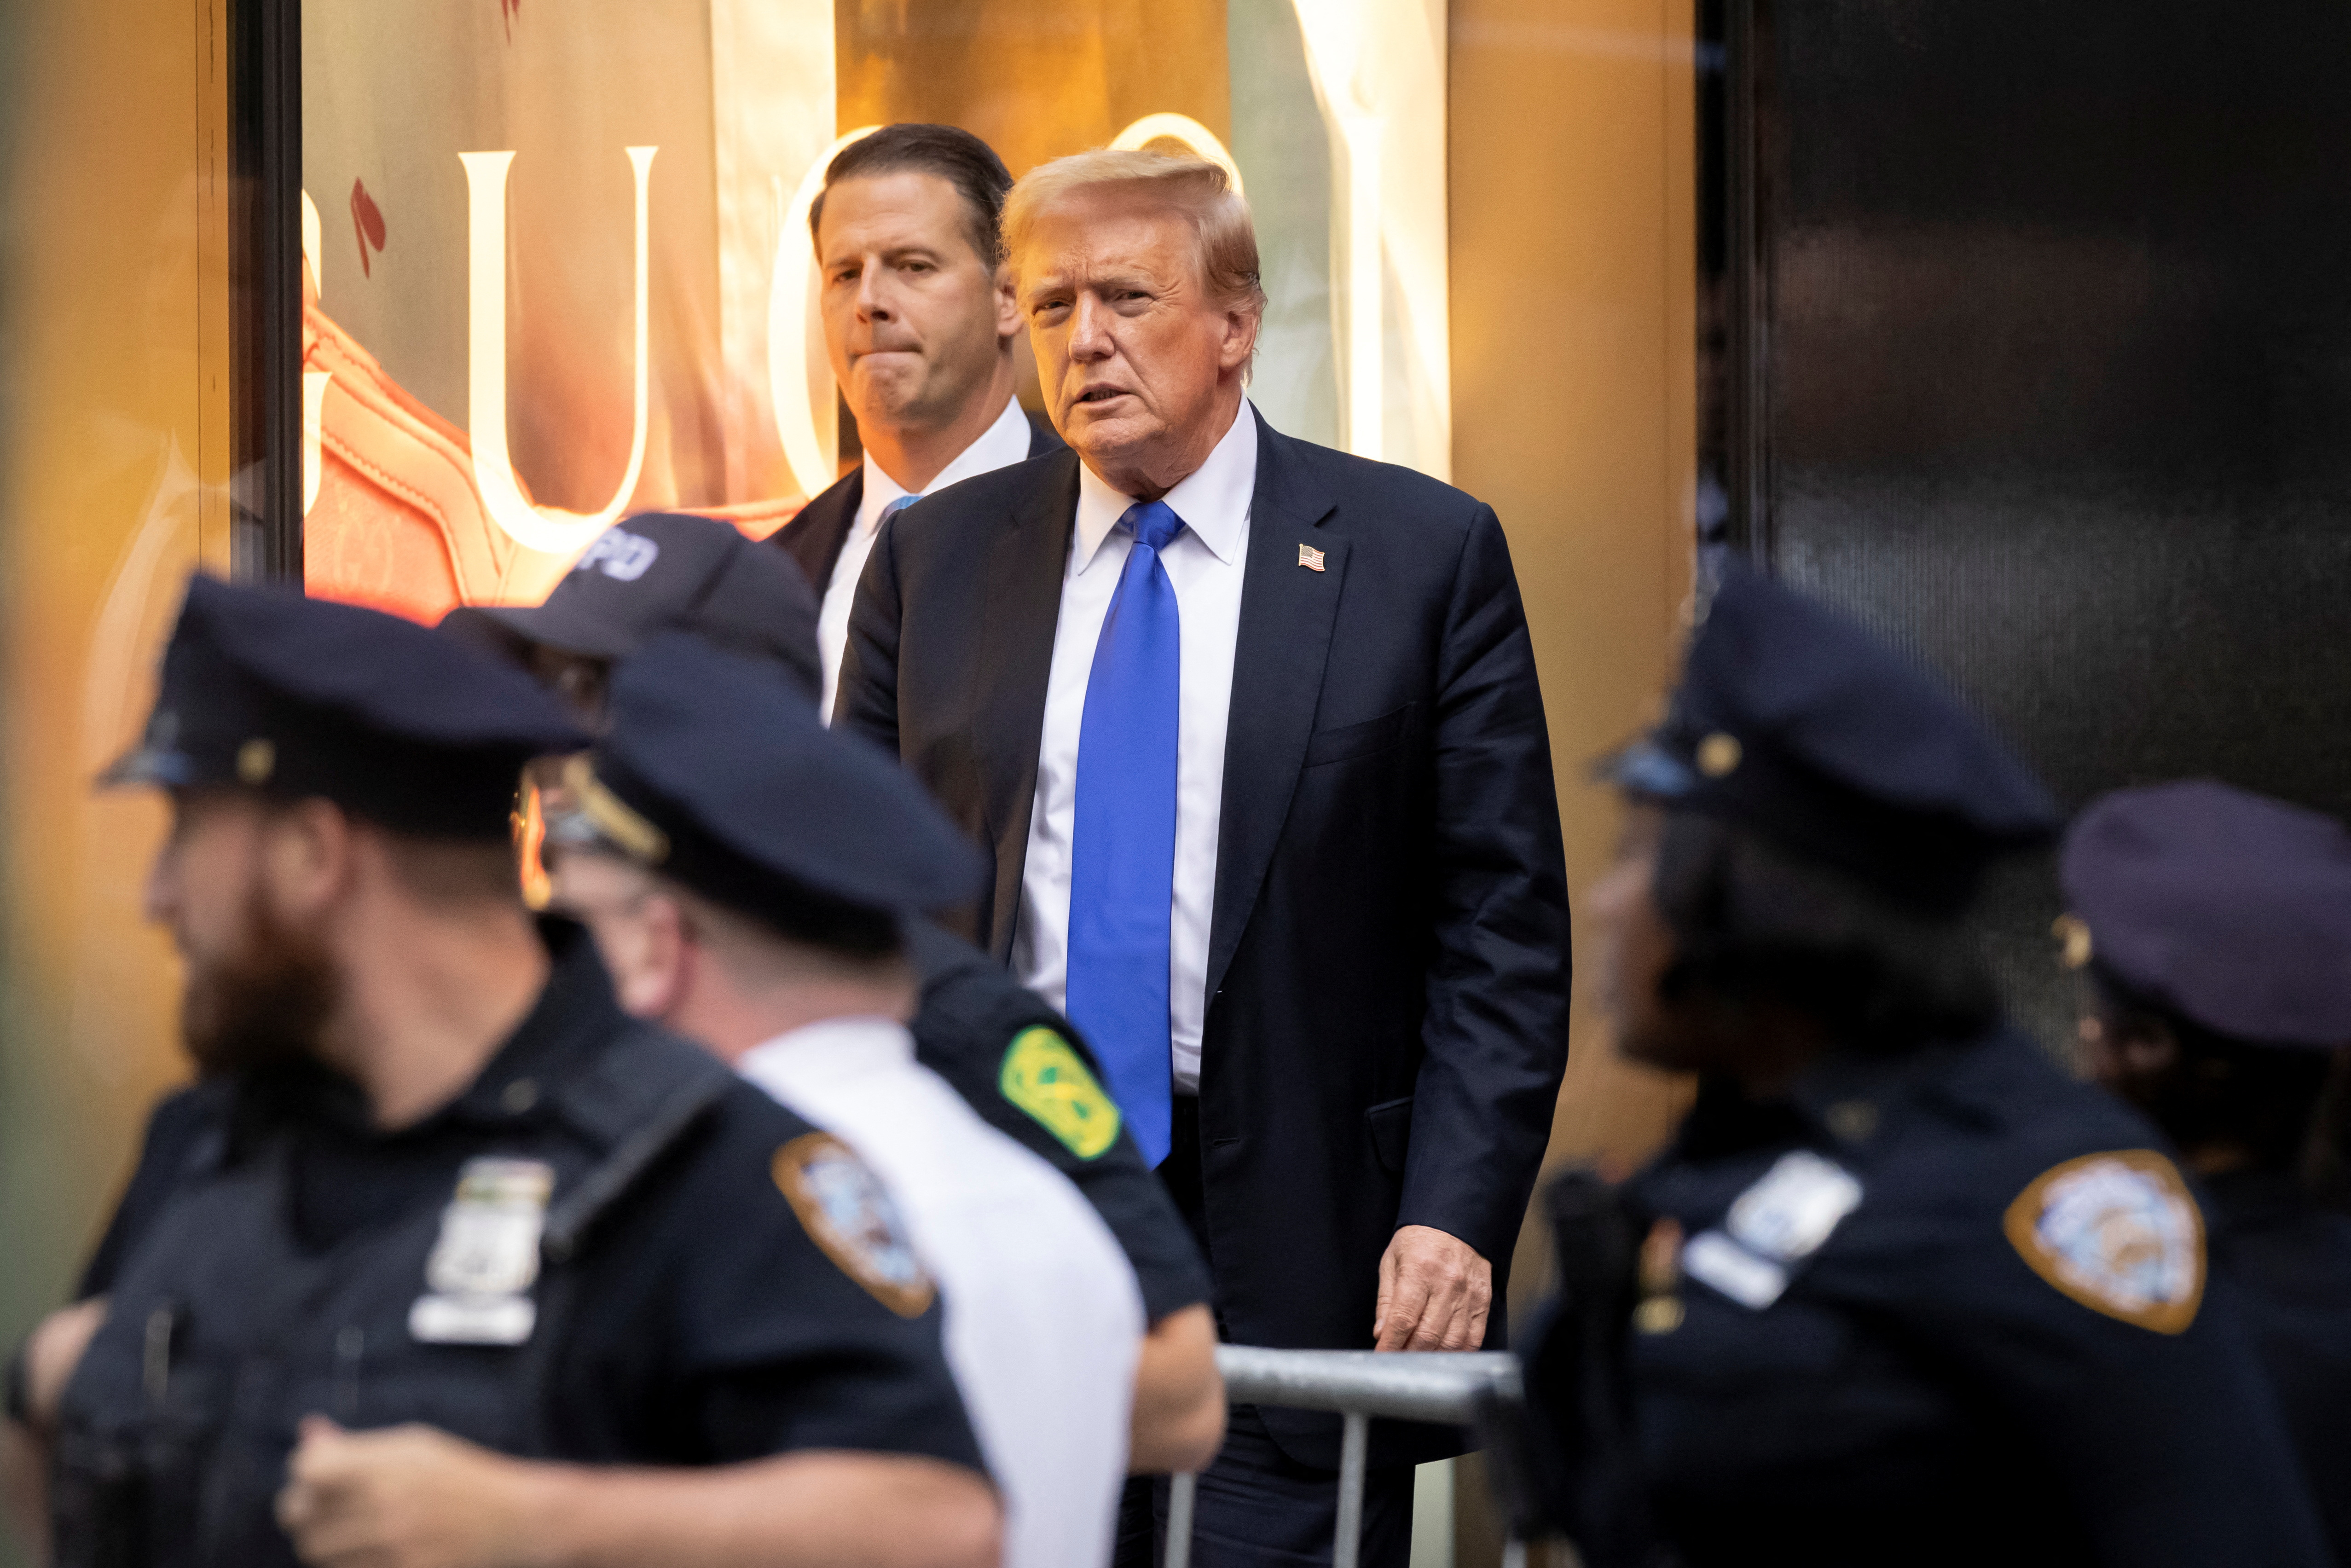 Former U.S. President Trump found guilty on 34 felony counts of falsifying business records, in New York